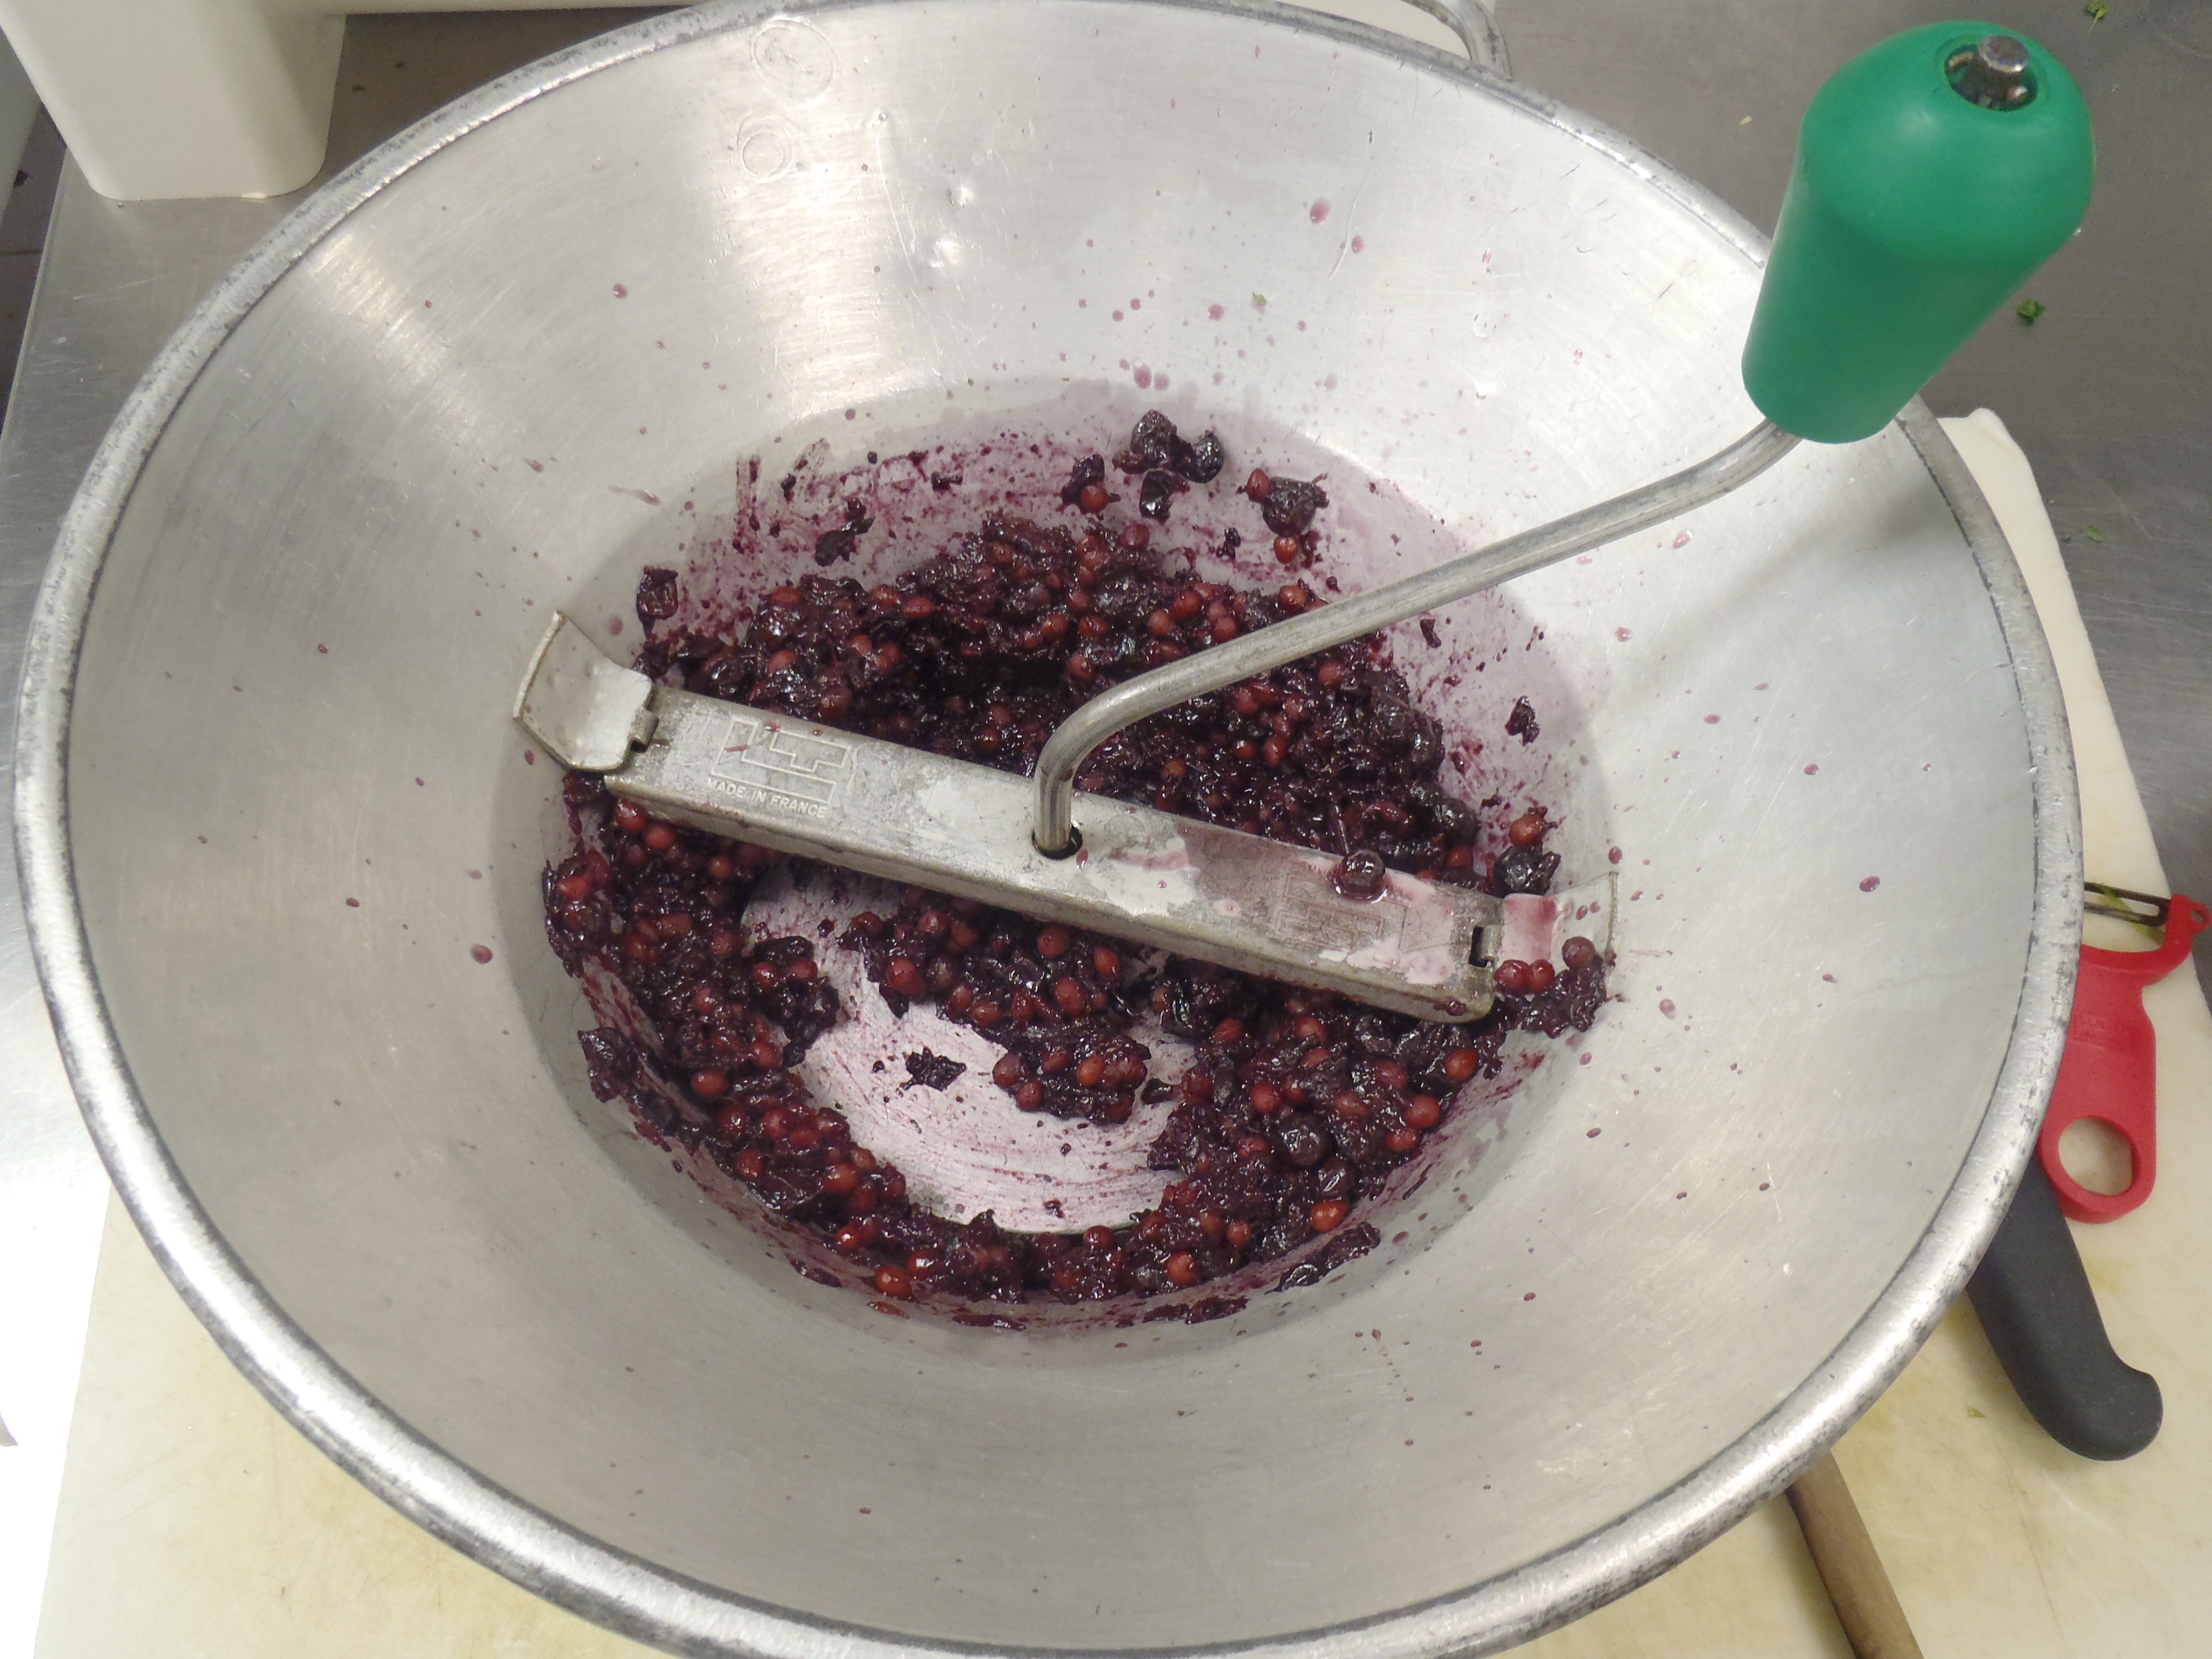 Milling chokecherries to remove the pits